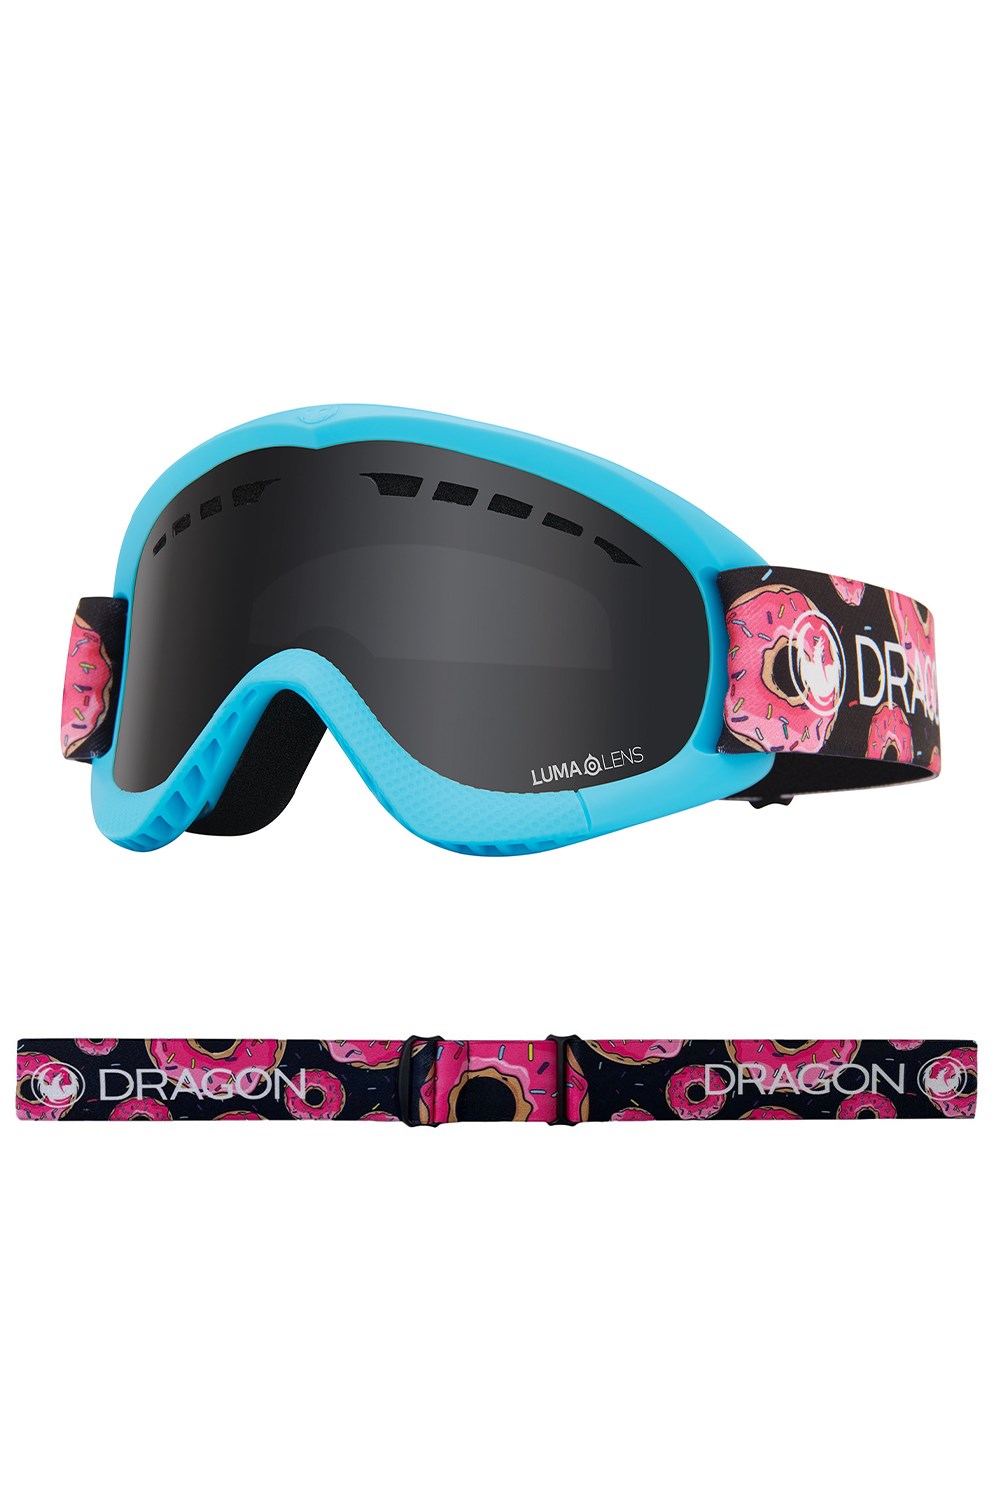 Dxs Youth Snow Goggles For Ages 10-15 -